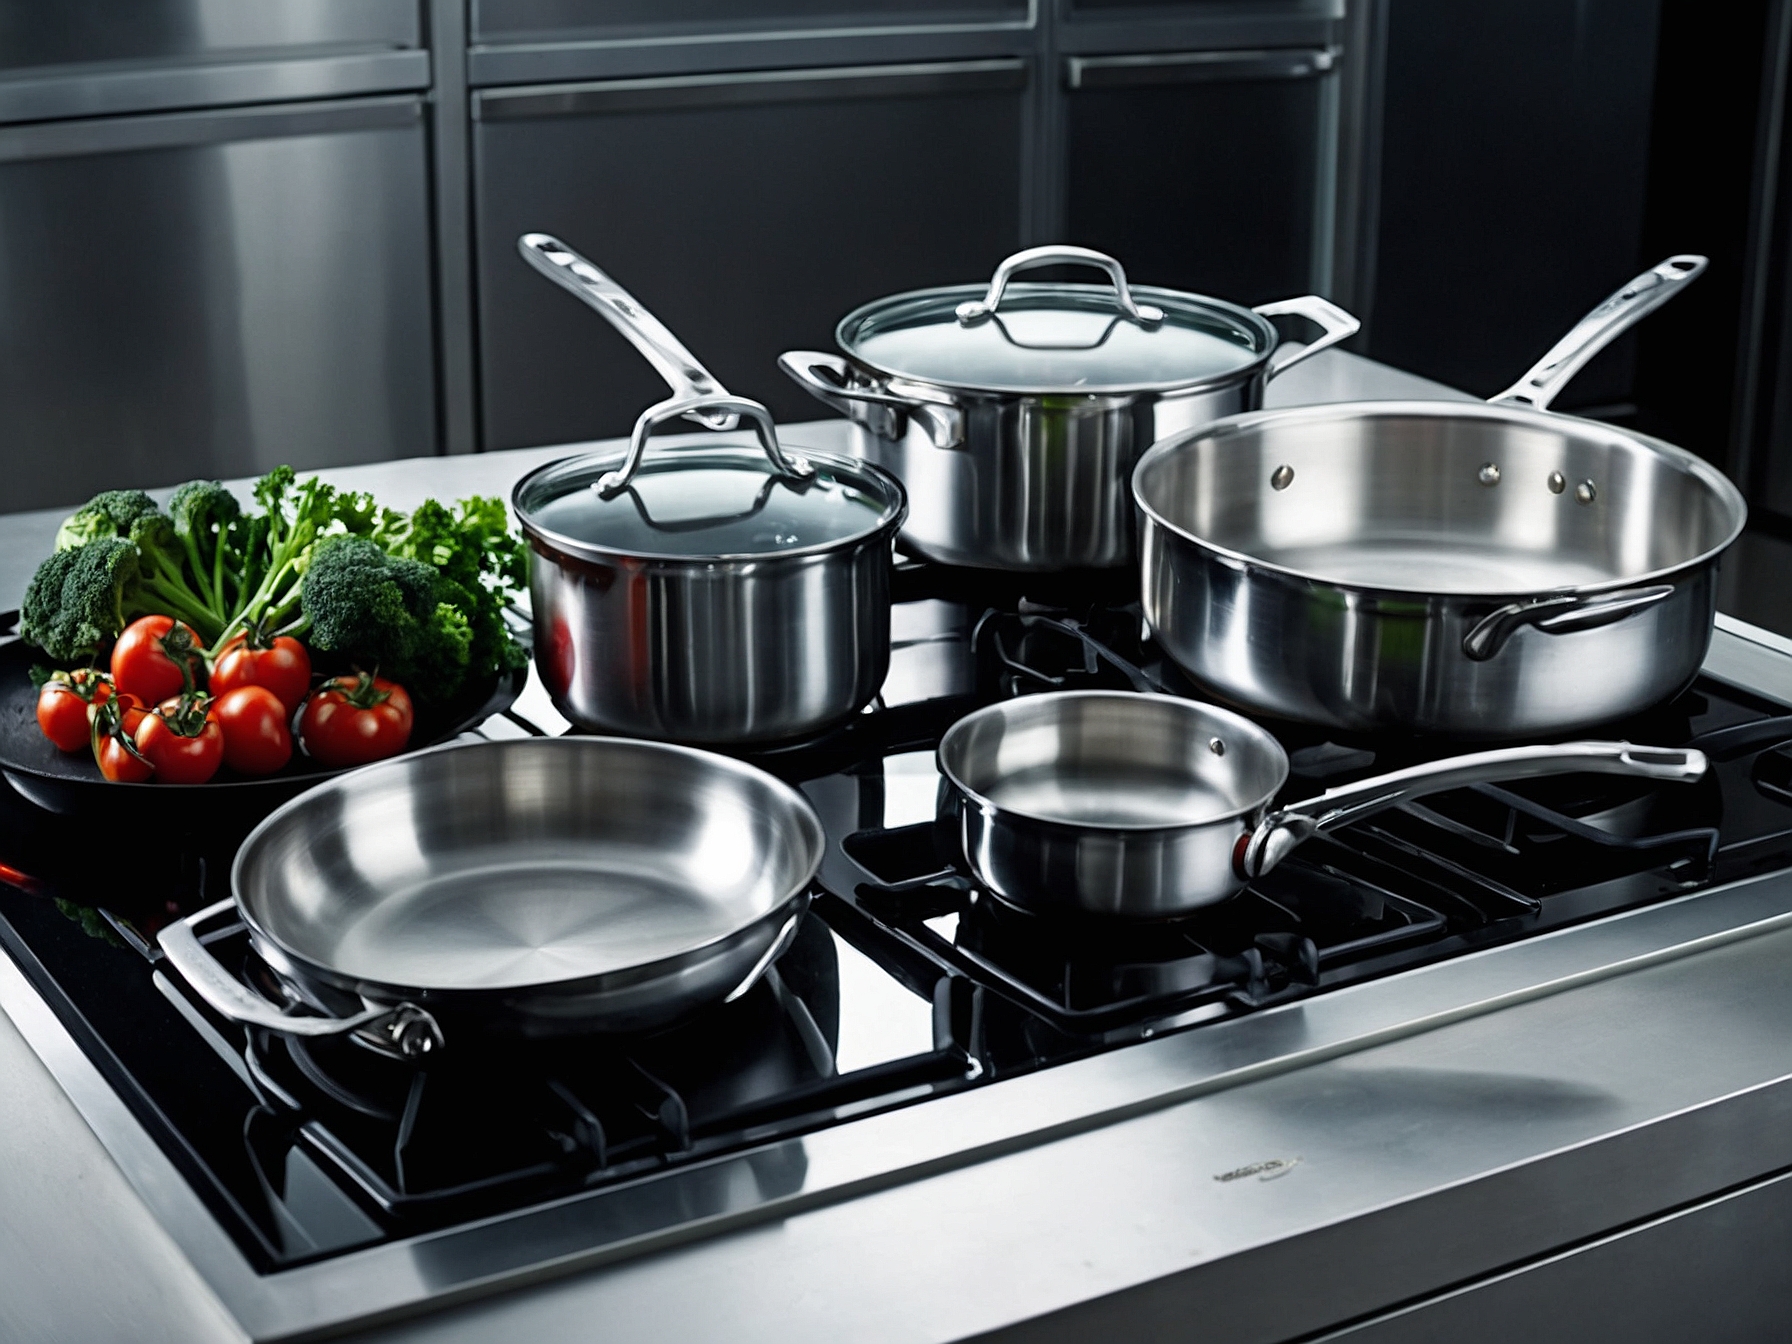 Command Performance Stainless Steel Cookware: Unleash Chef Skills!